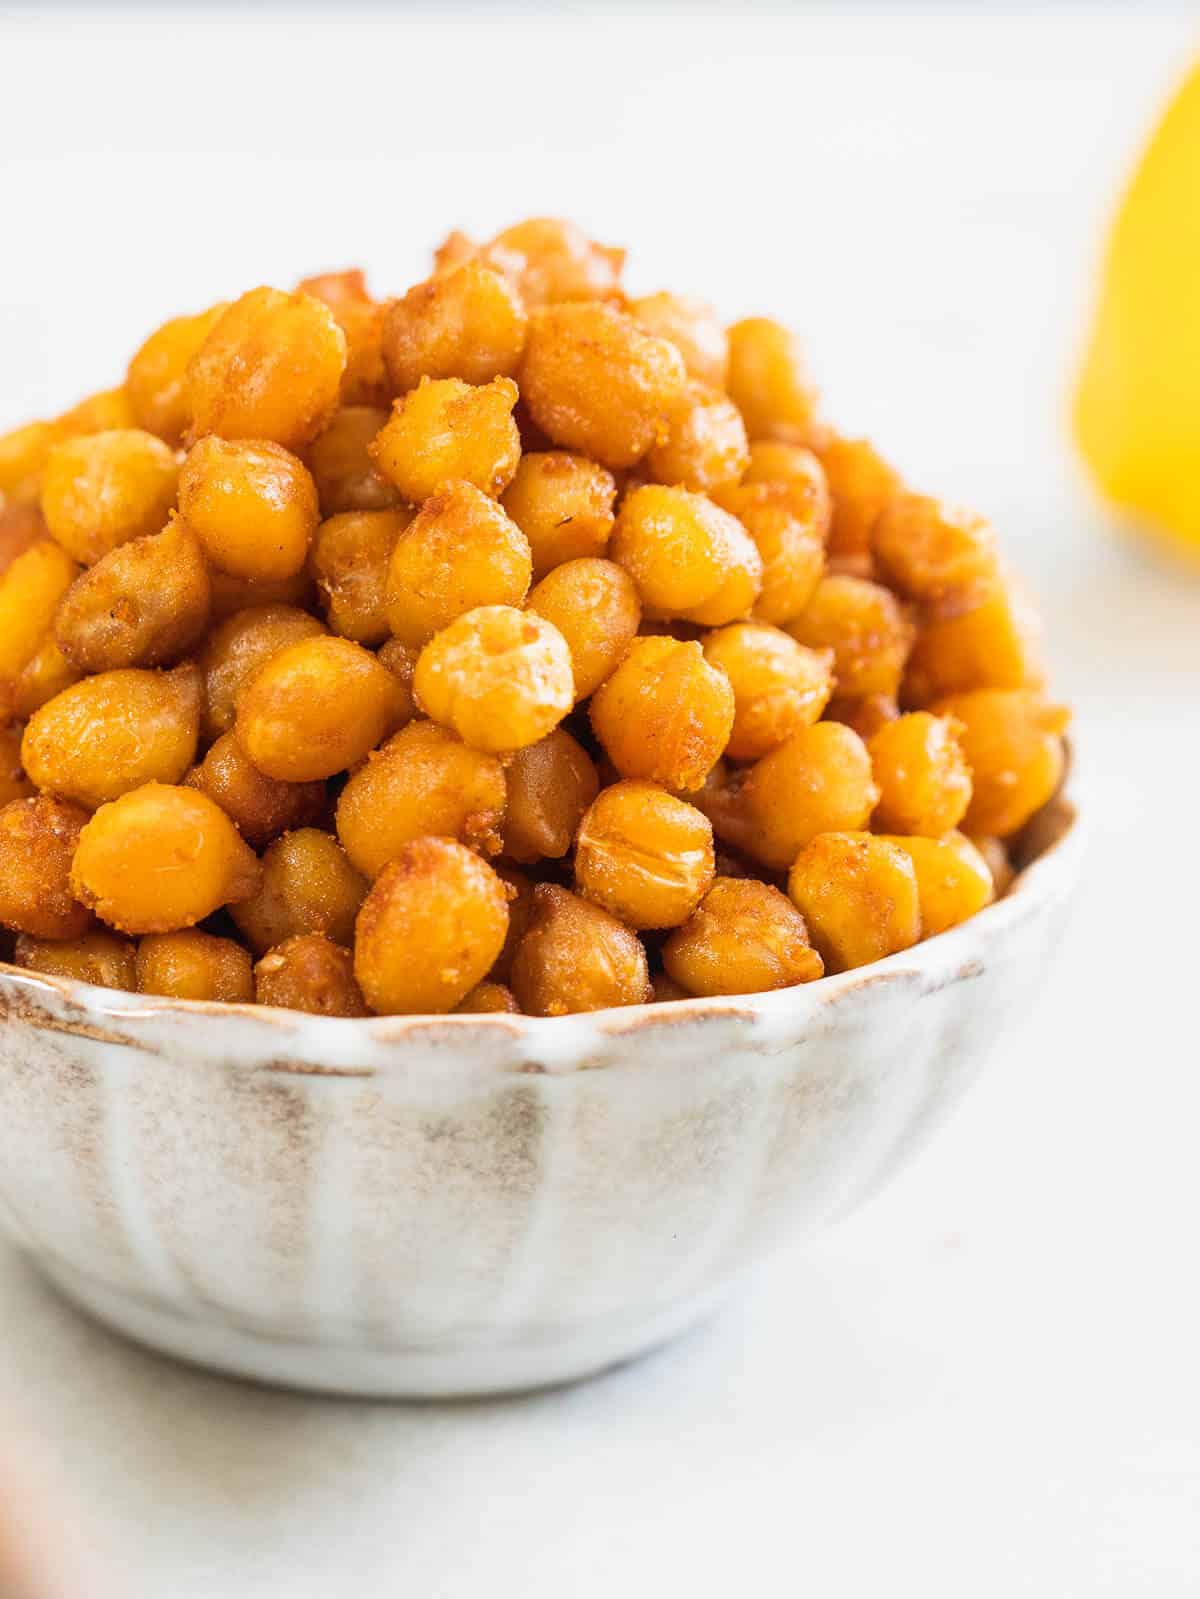 oven-roasted chickpeas served on a small bowl.